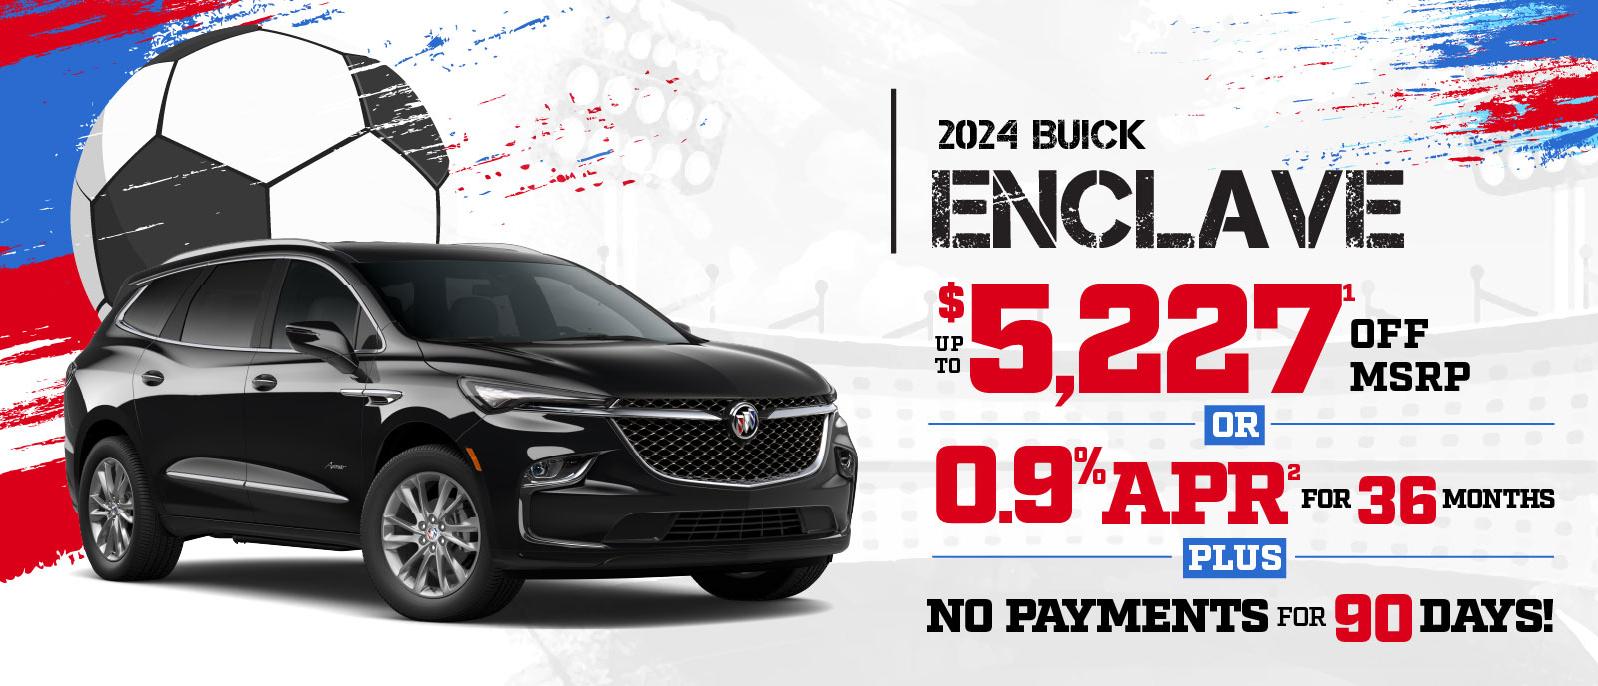 New Buick Enclave - SAVE up to $5,227 or 0.9% APR for 36 months plus no payments for 90 days